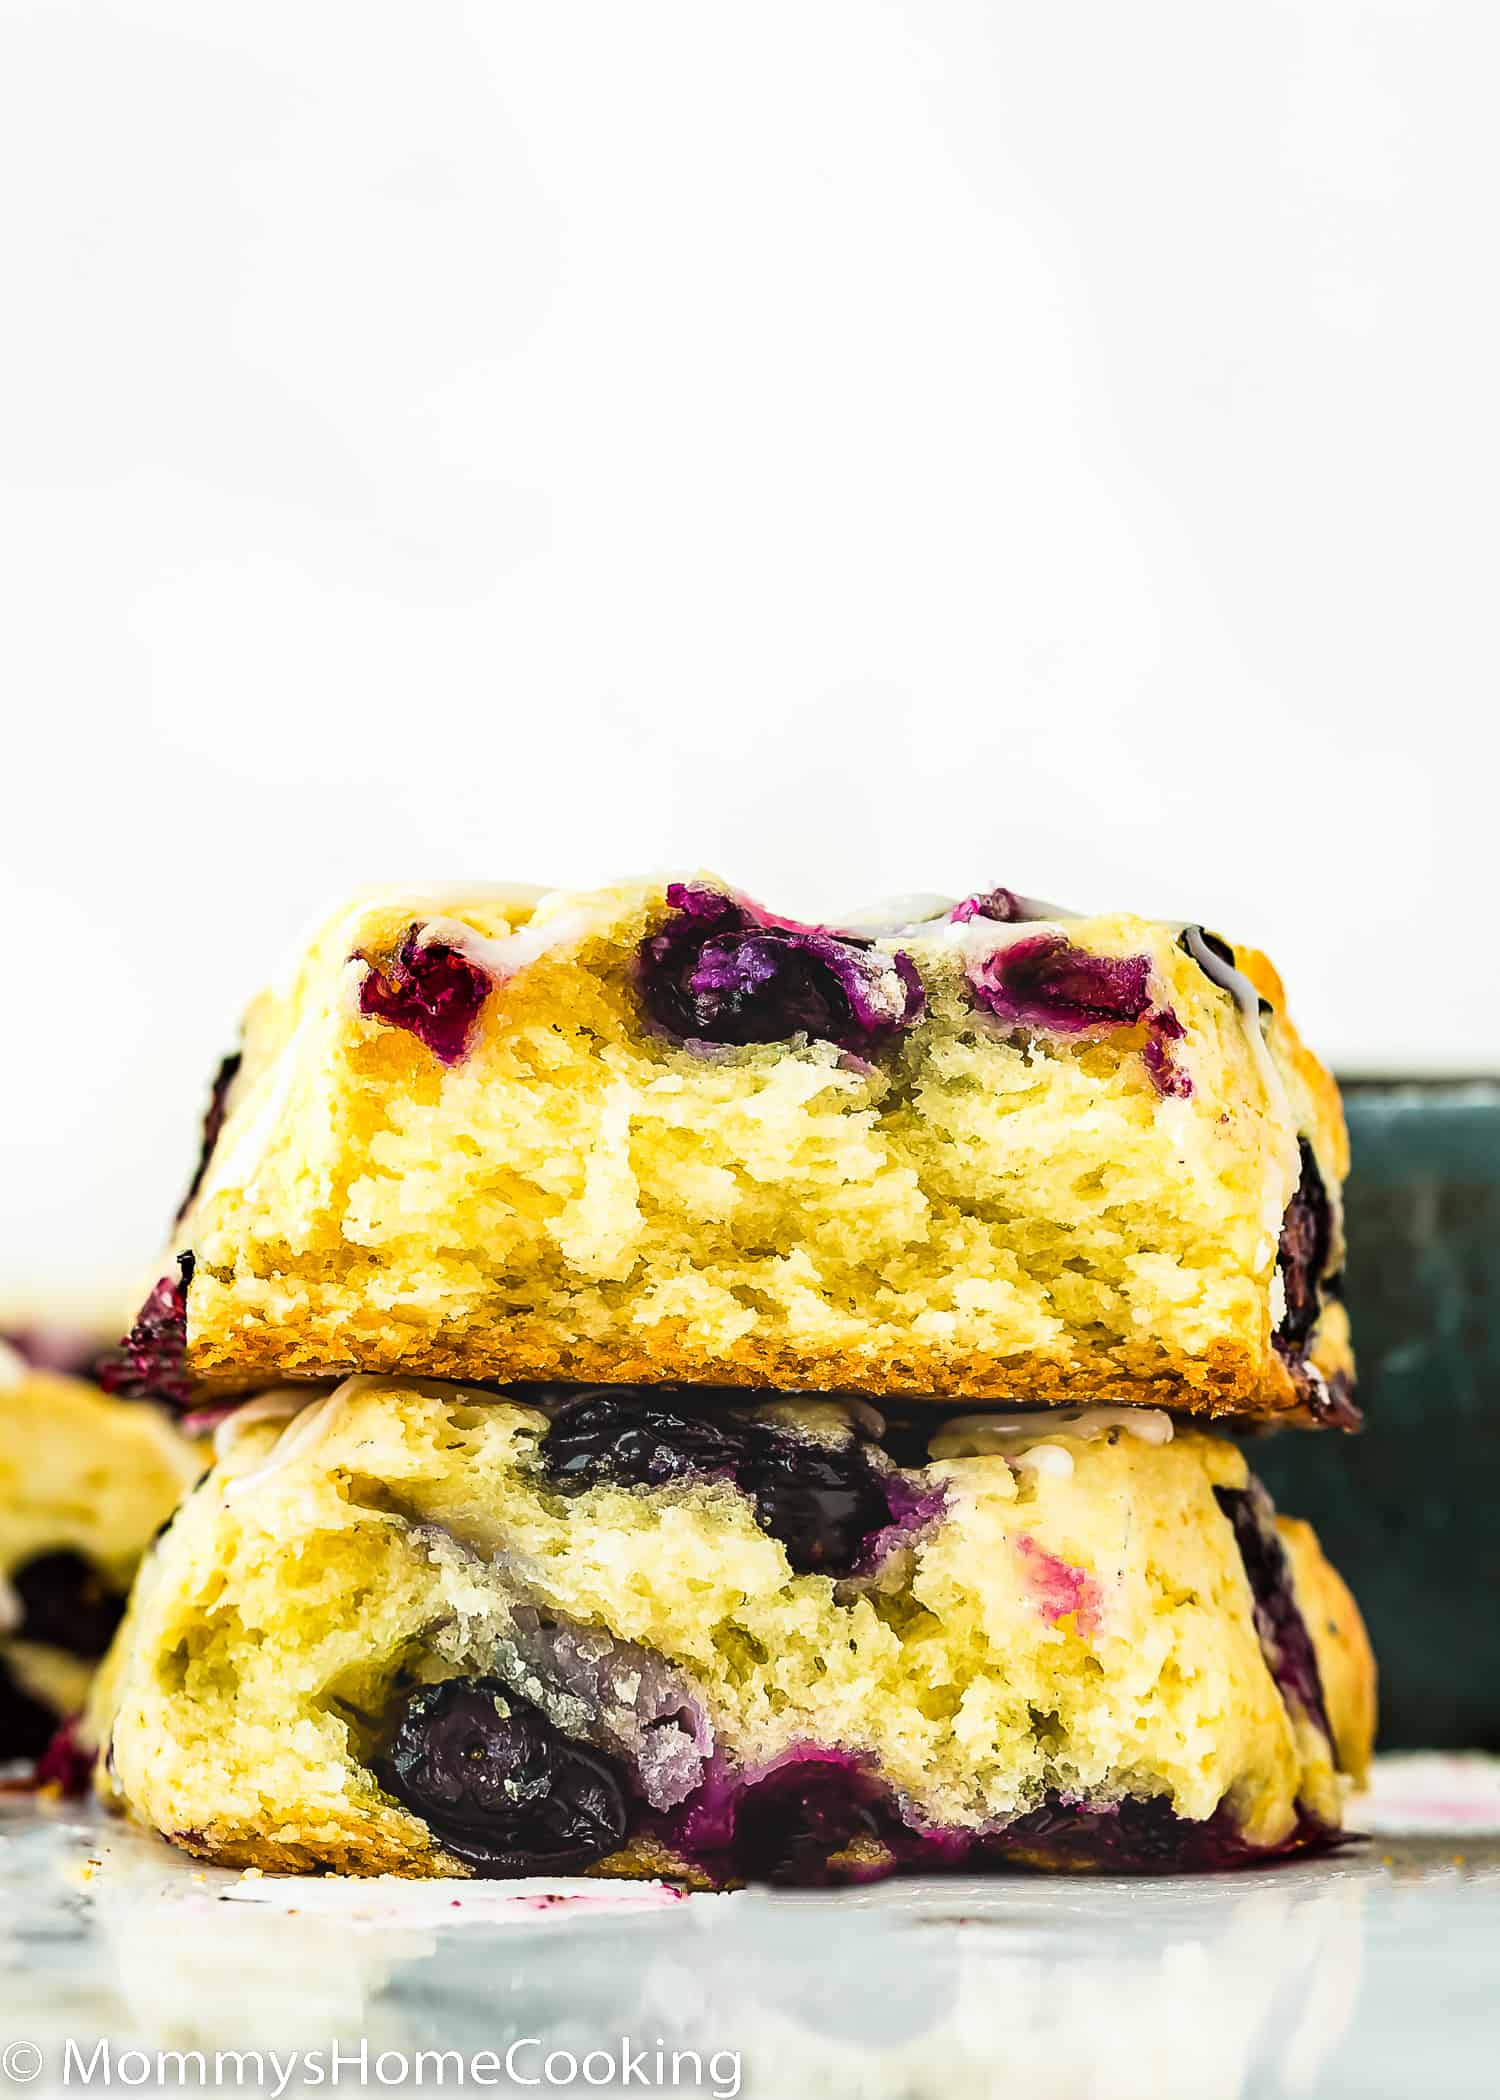 an Eggless Blueberry Scones cut into half showing its inside flaky texture.